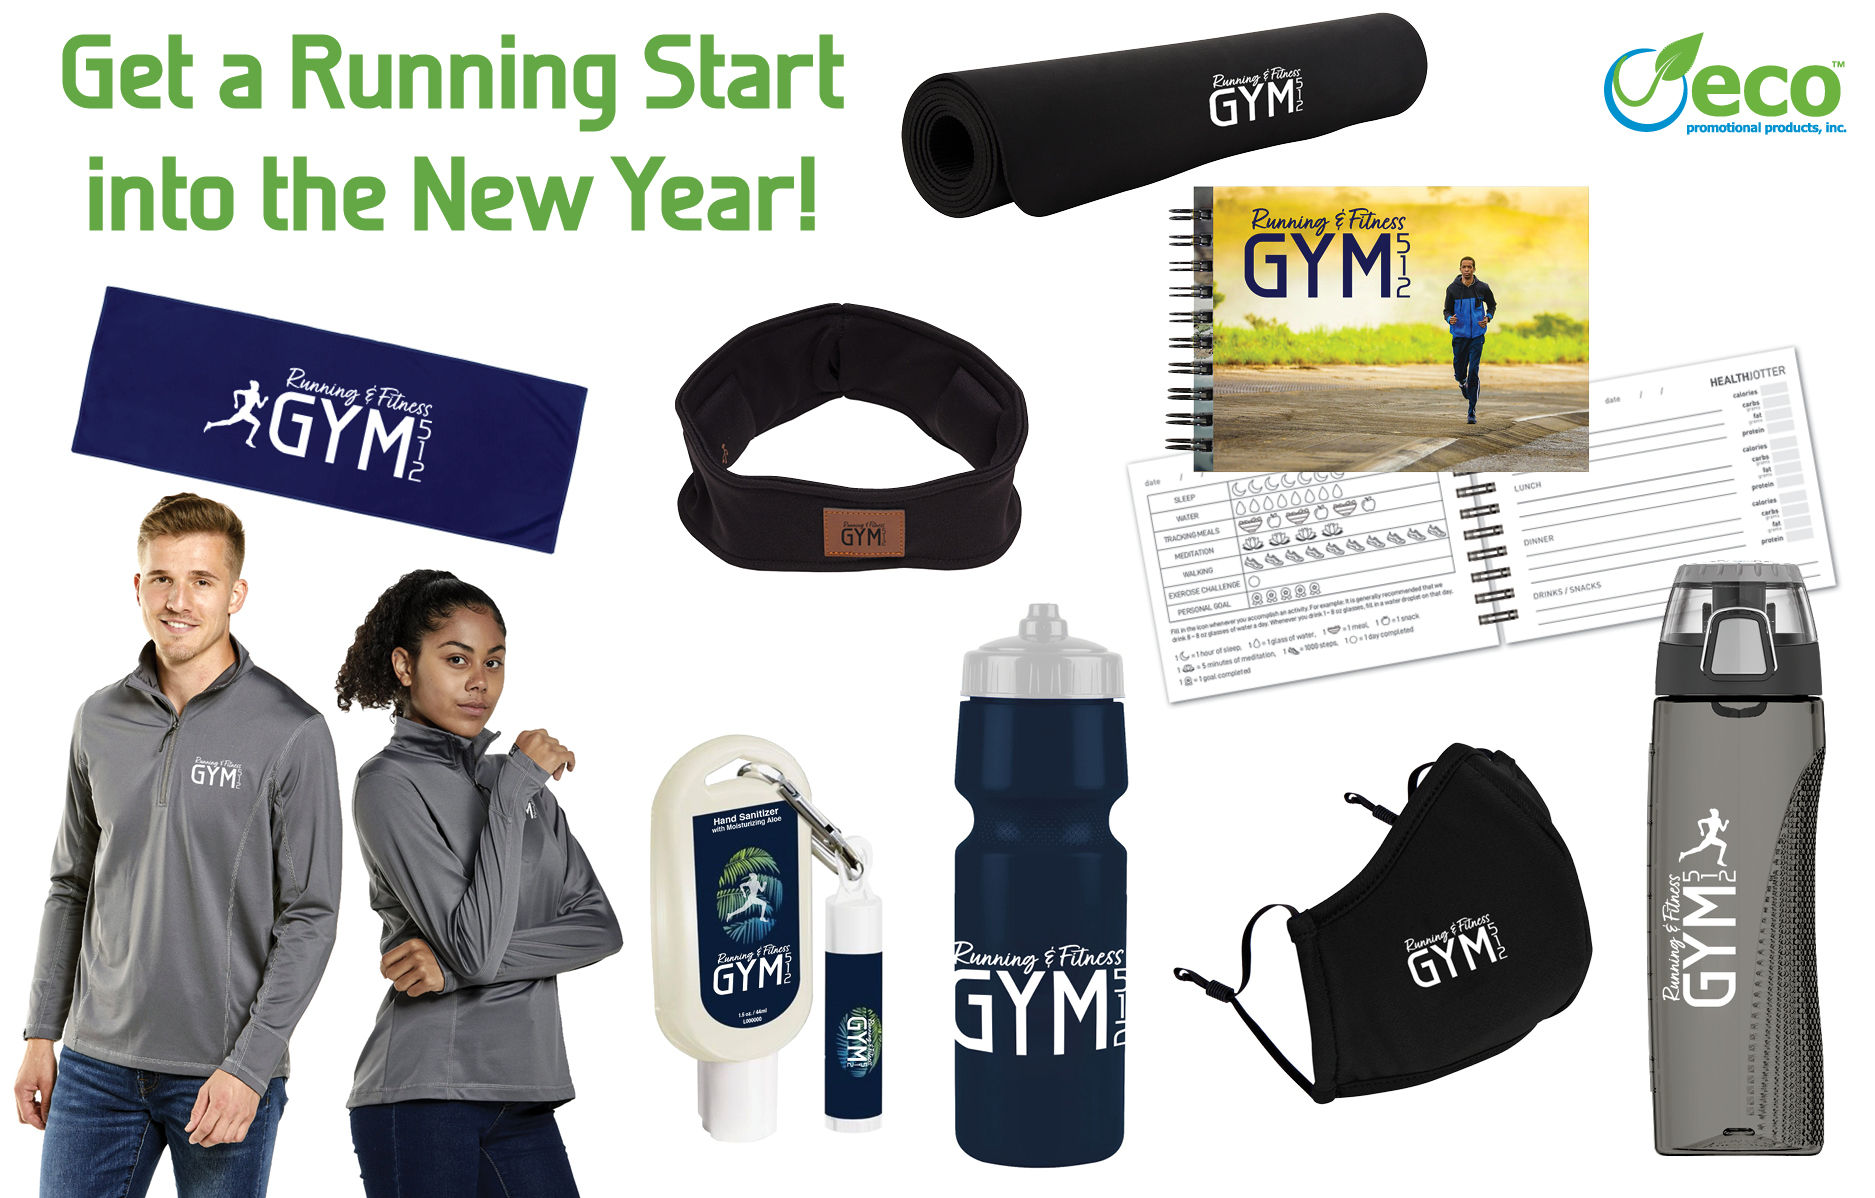 Get Healthy in 2021 with Branded Health and Wellness Promotional Products